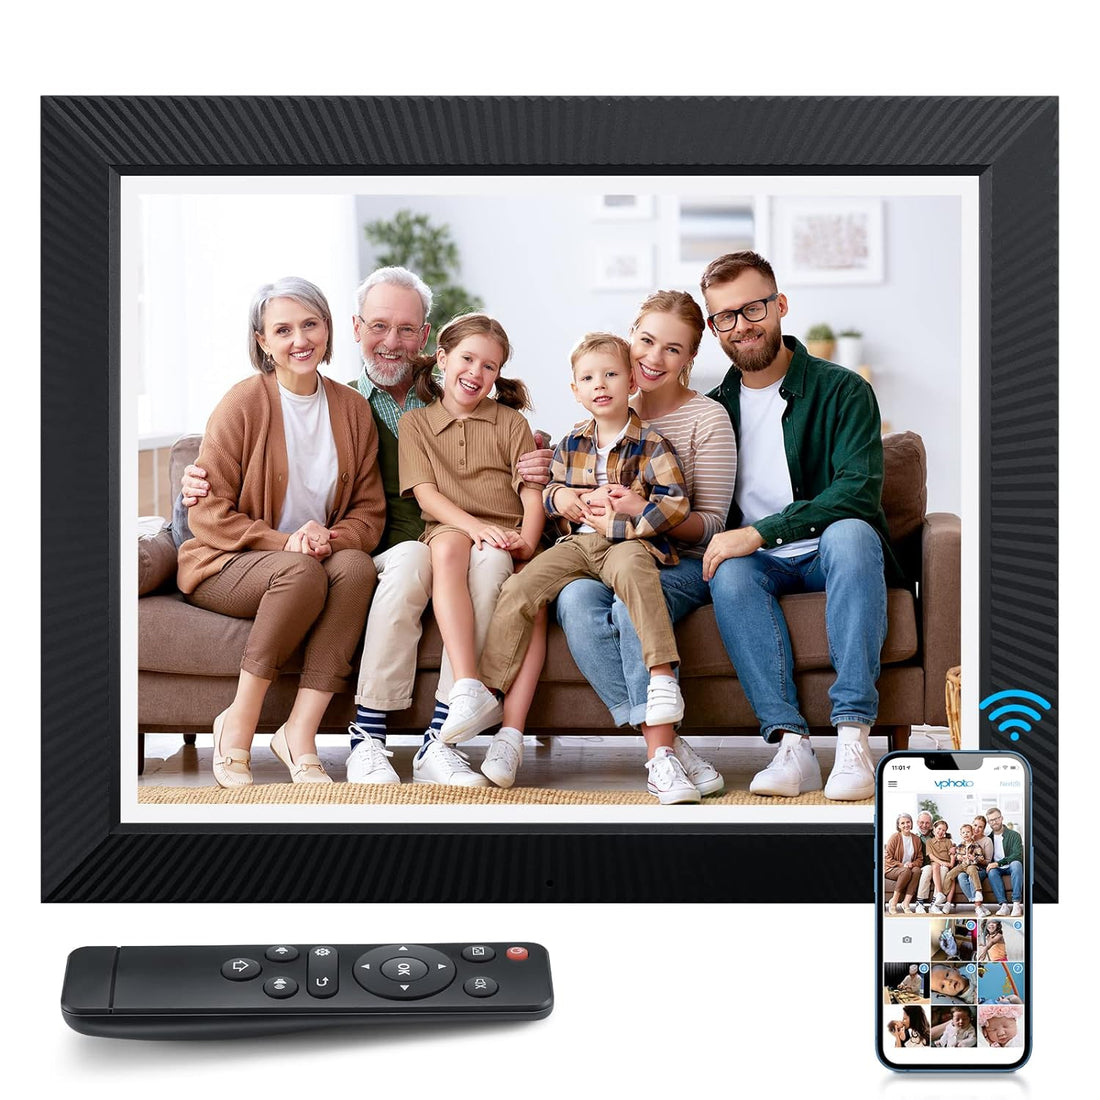 Digital Picture Frame - Benibela 16.2 Inch 32GB Dual WiFi Smart Photo Frame with 1258*930 IPS Touch Screen, Motion Sensor, Remote, Gift Display for Sharing Photo Video Anywhere via App Cloud Email USB